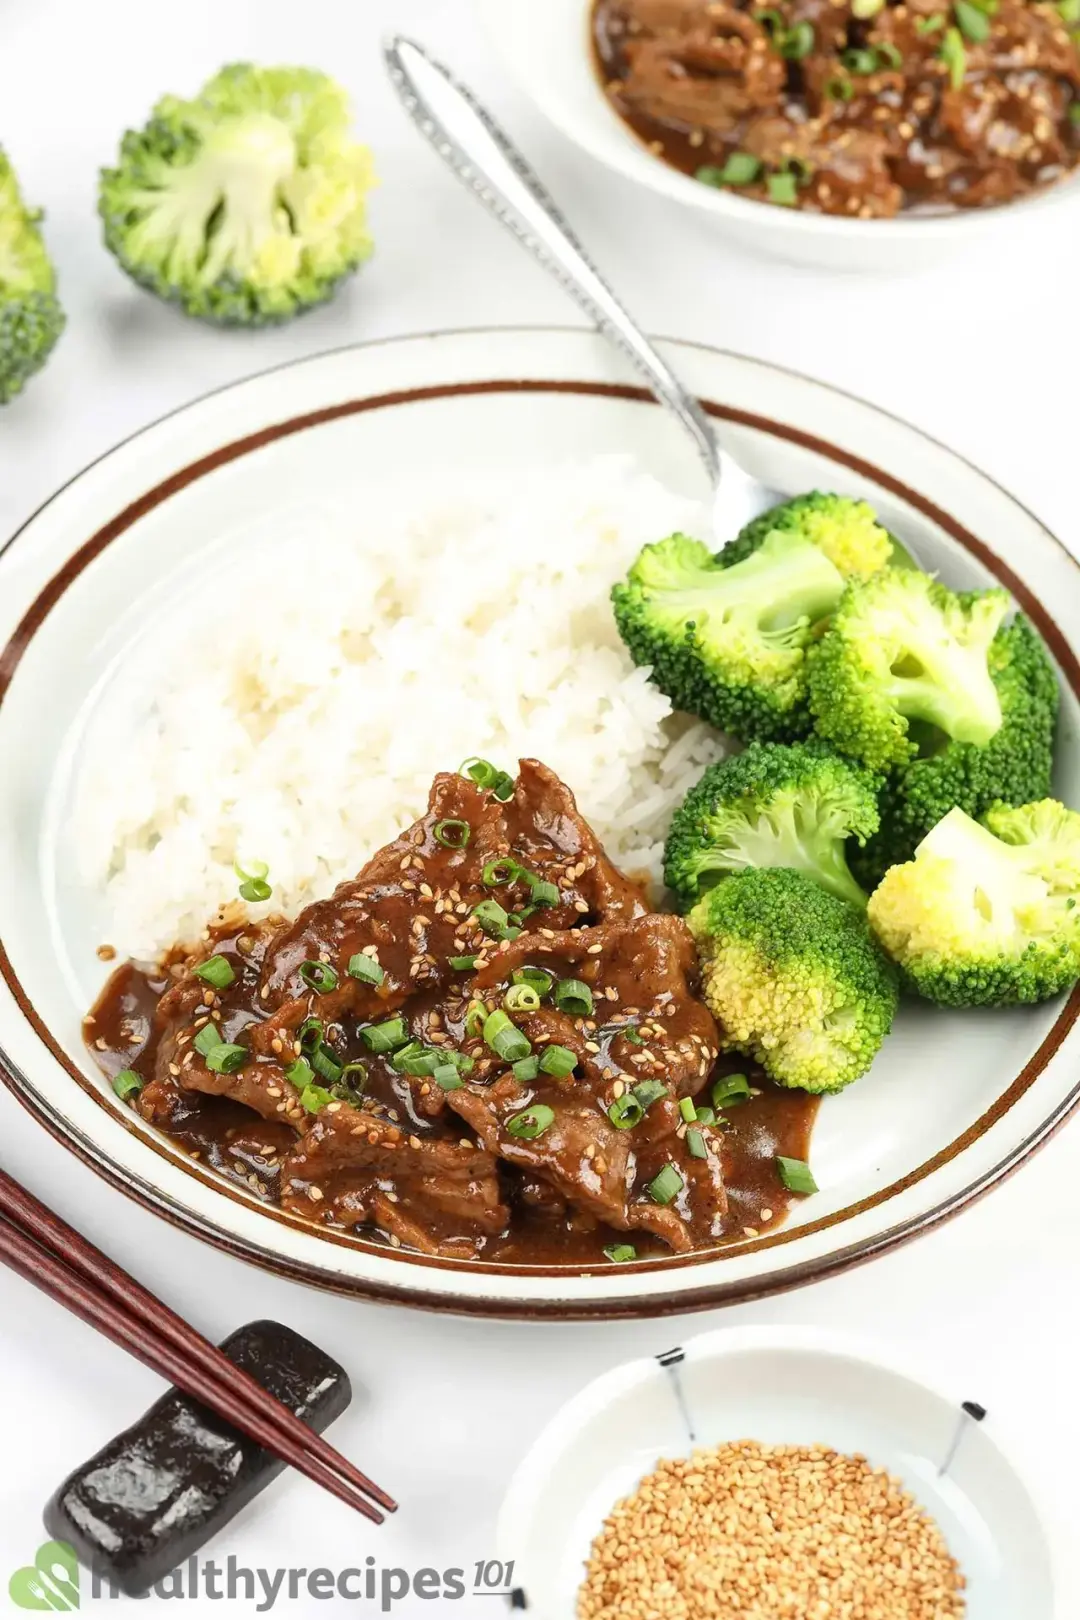 What Cut of Meat Is Used for Teriyaki Beef